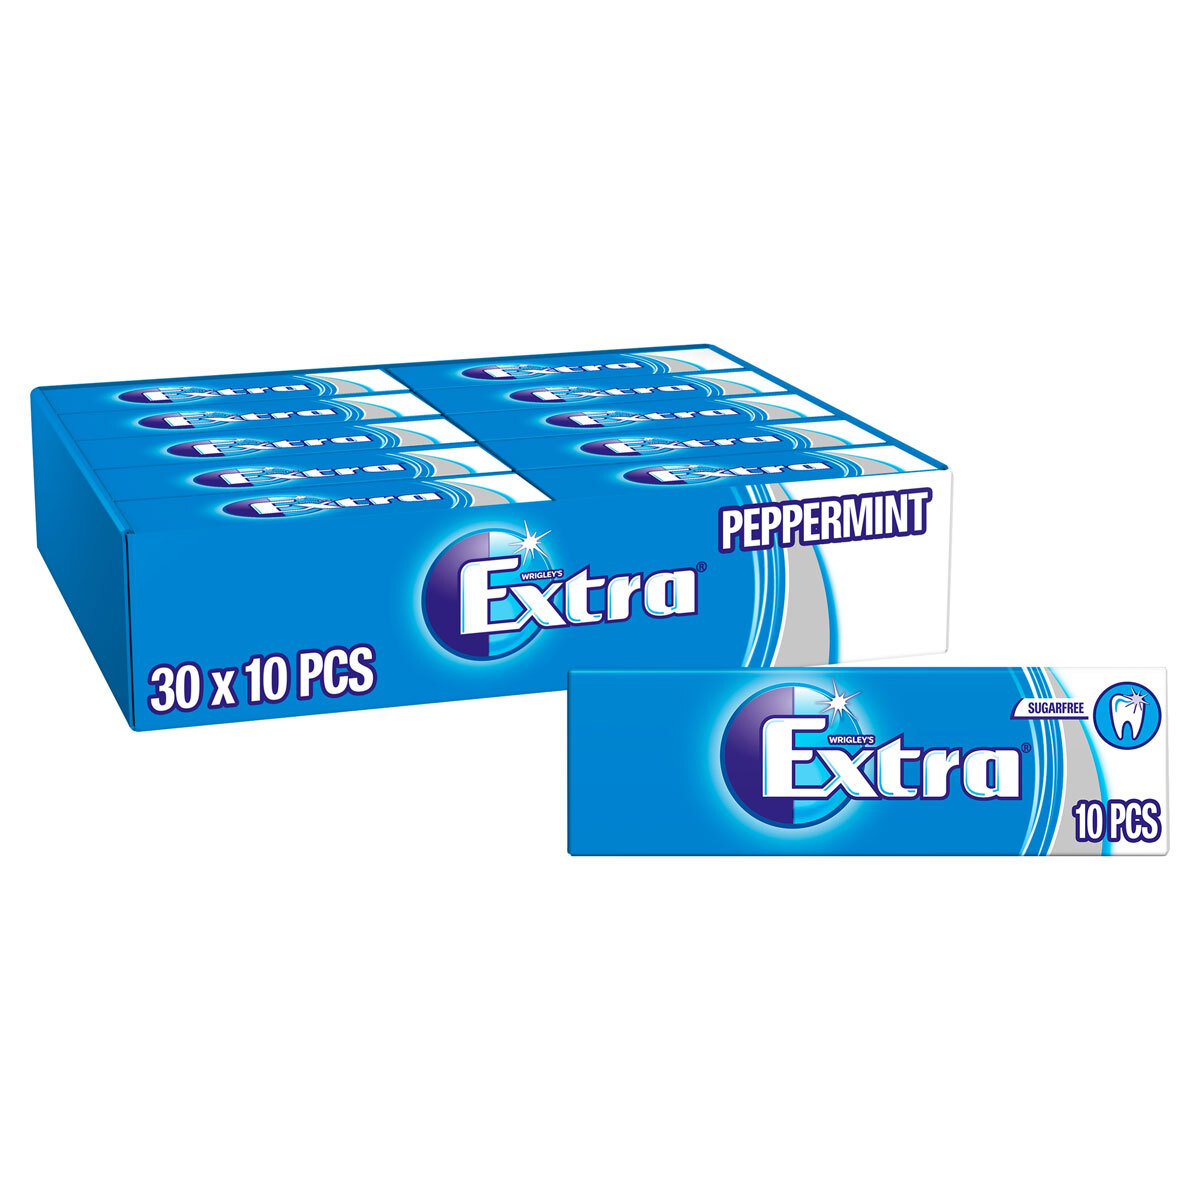 Wrigley's Extra Peppermint Gum, 30 x 10 Pack